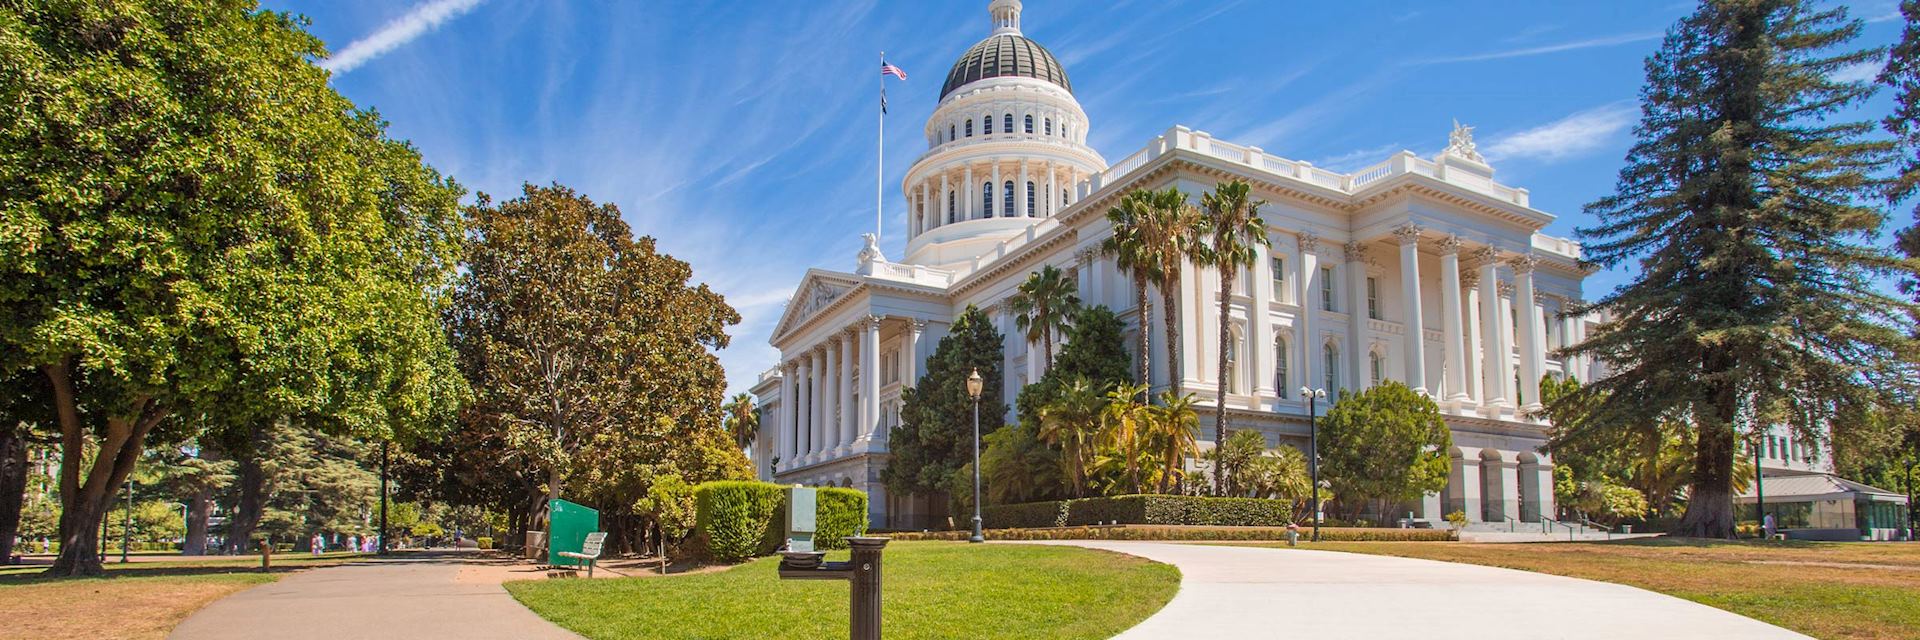 Visit Sacramento on a trip to California | Audley Travel